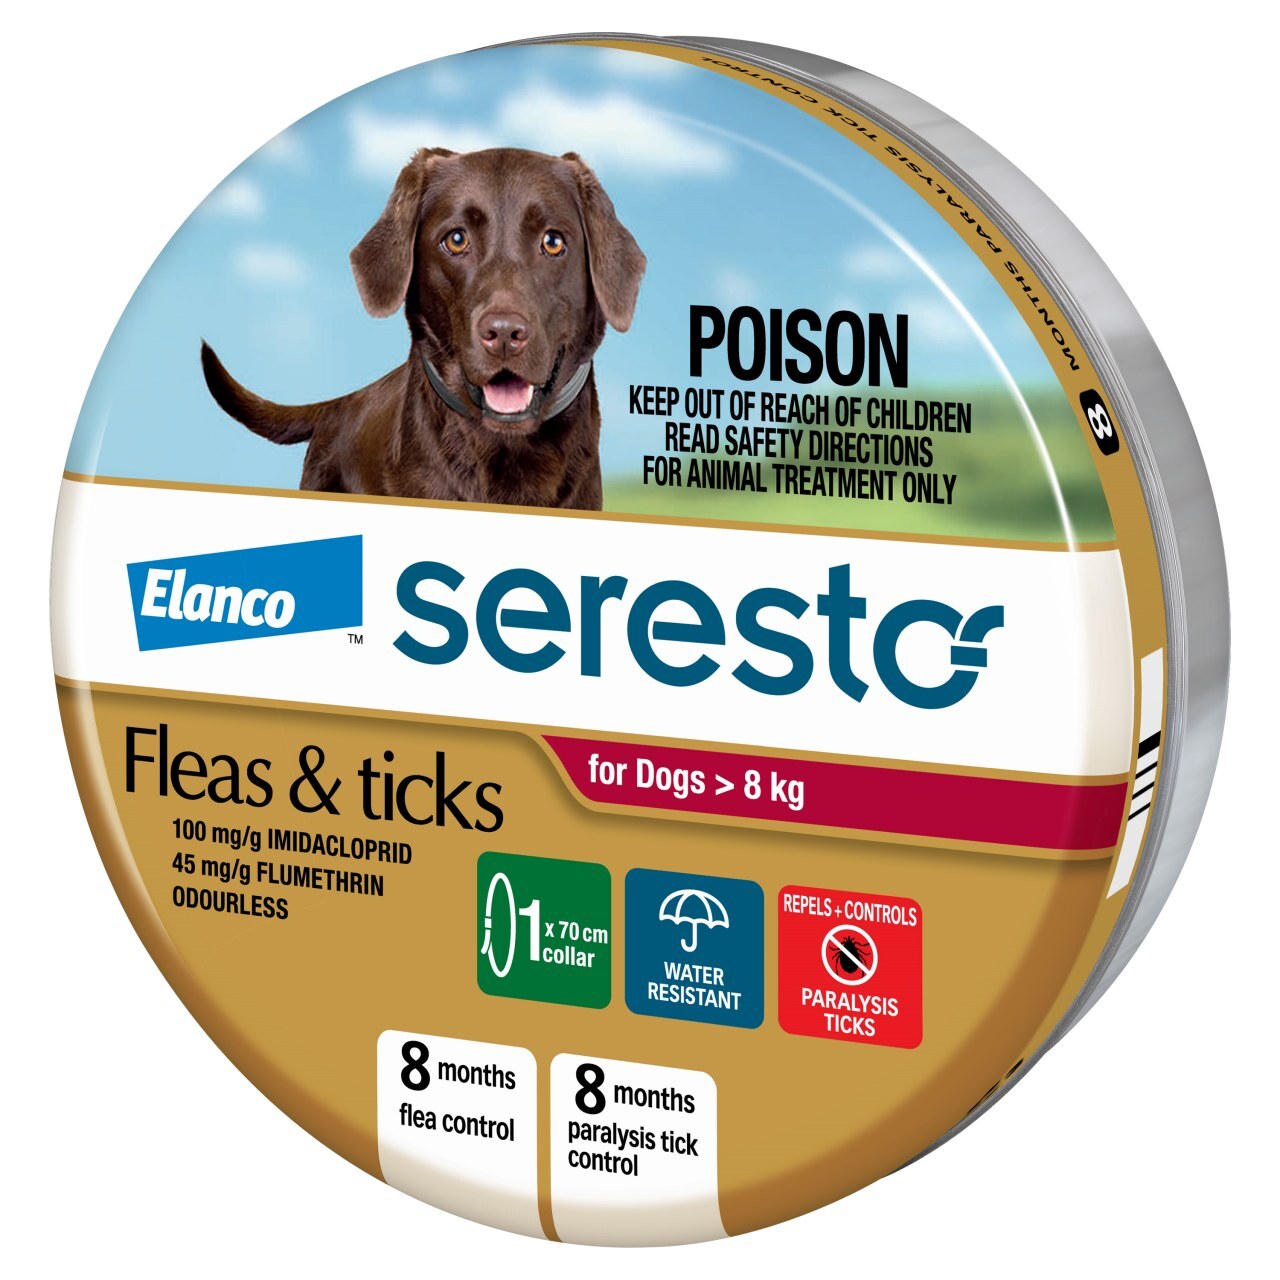 seresto-flea-tick-collar-lasts-up-to-8-months-for-dogs-over-8kg